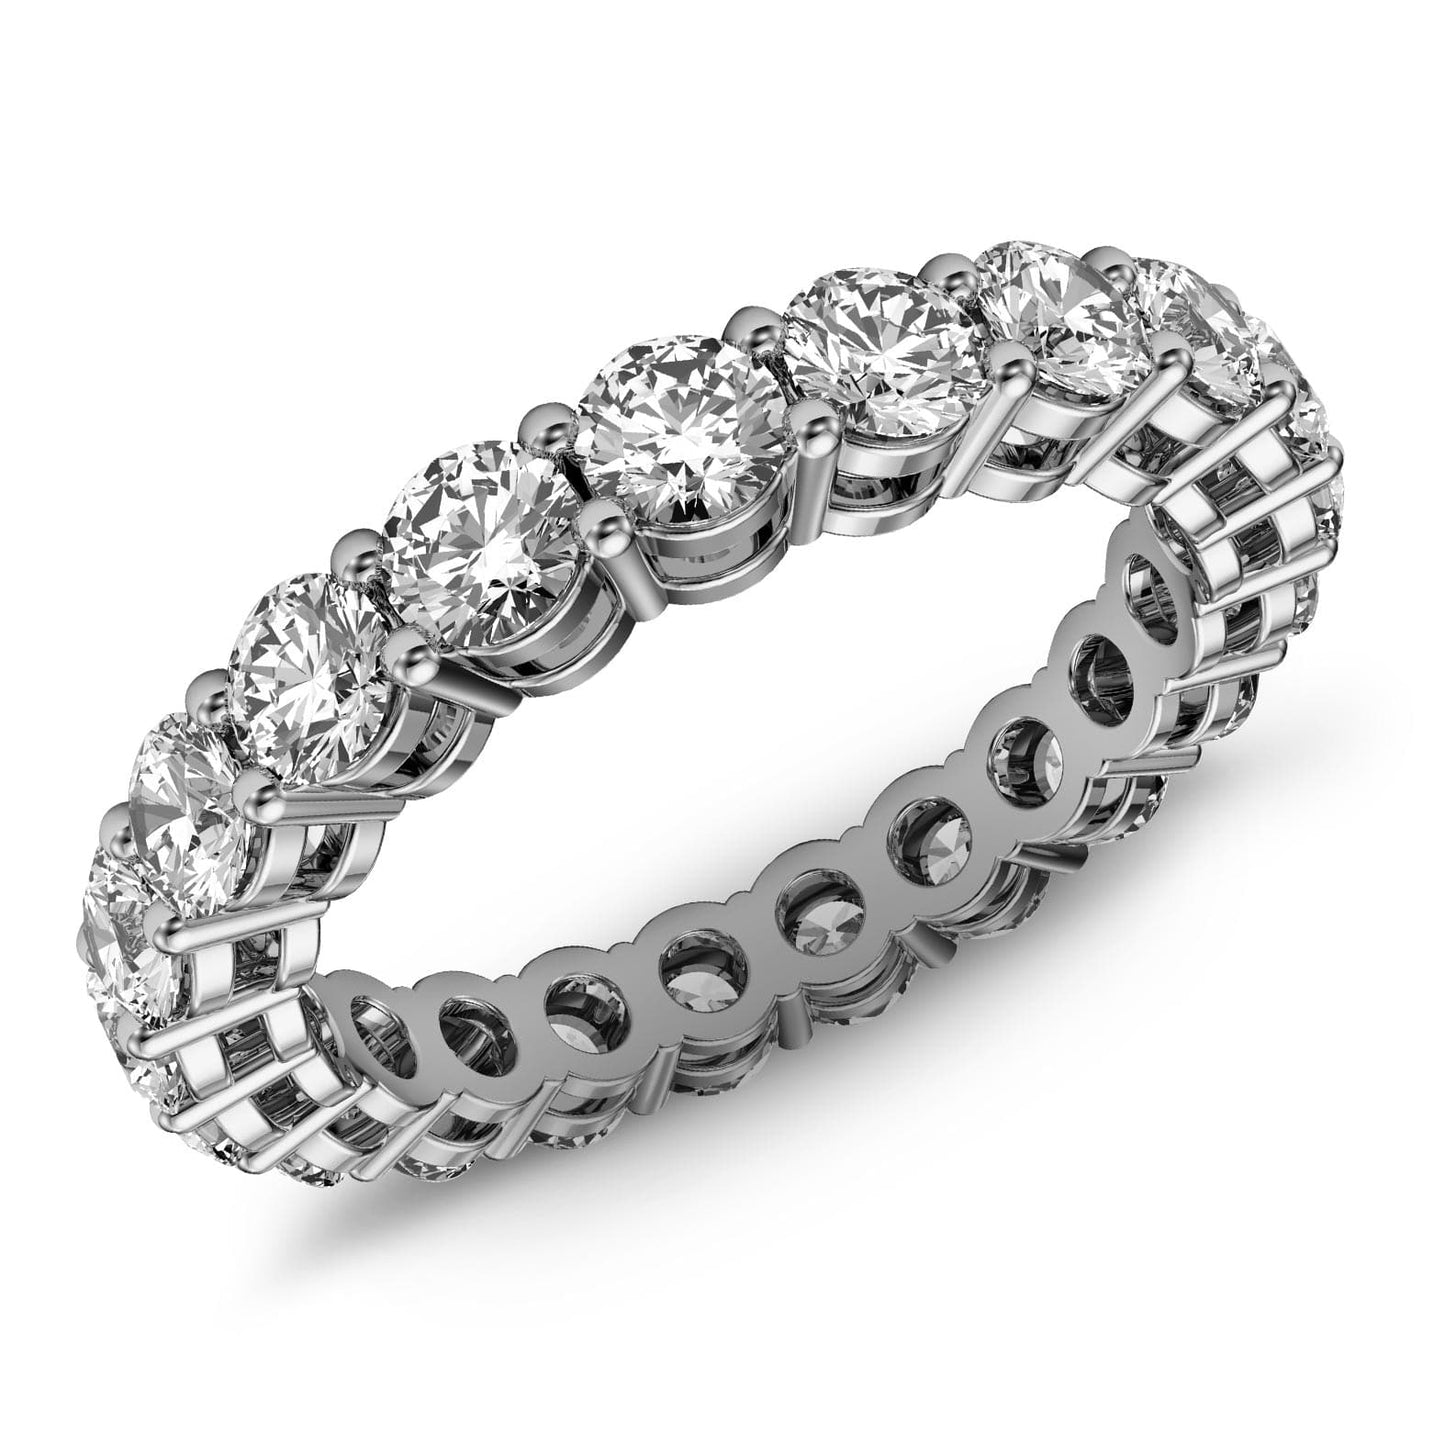 2ct Shared Prong Diamond Eternity Ring in 14k Gold